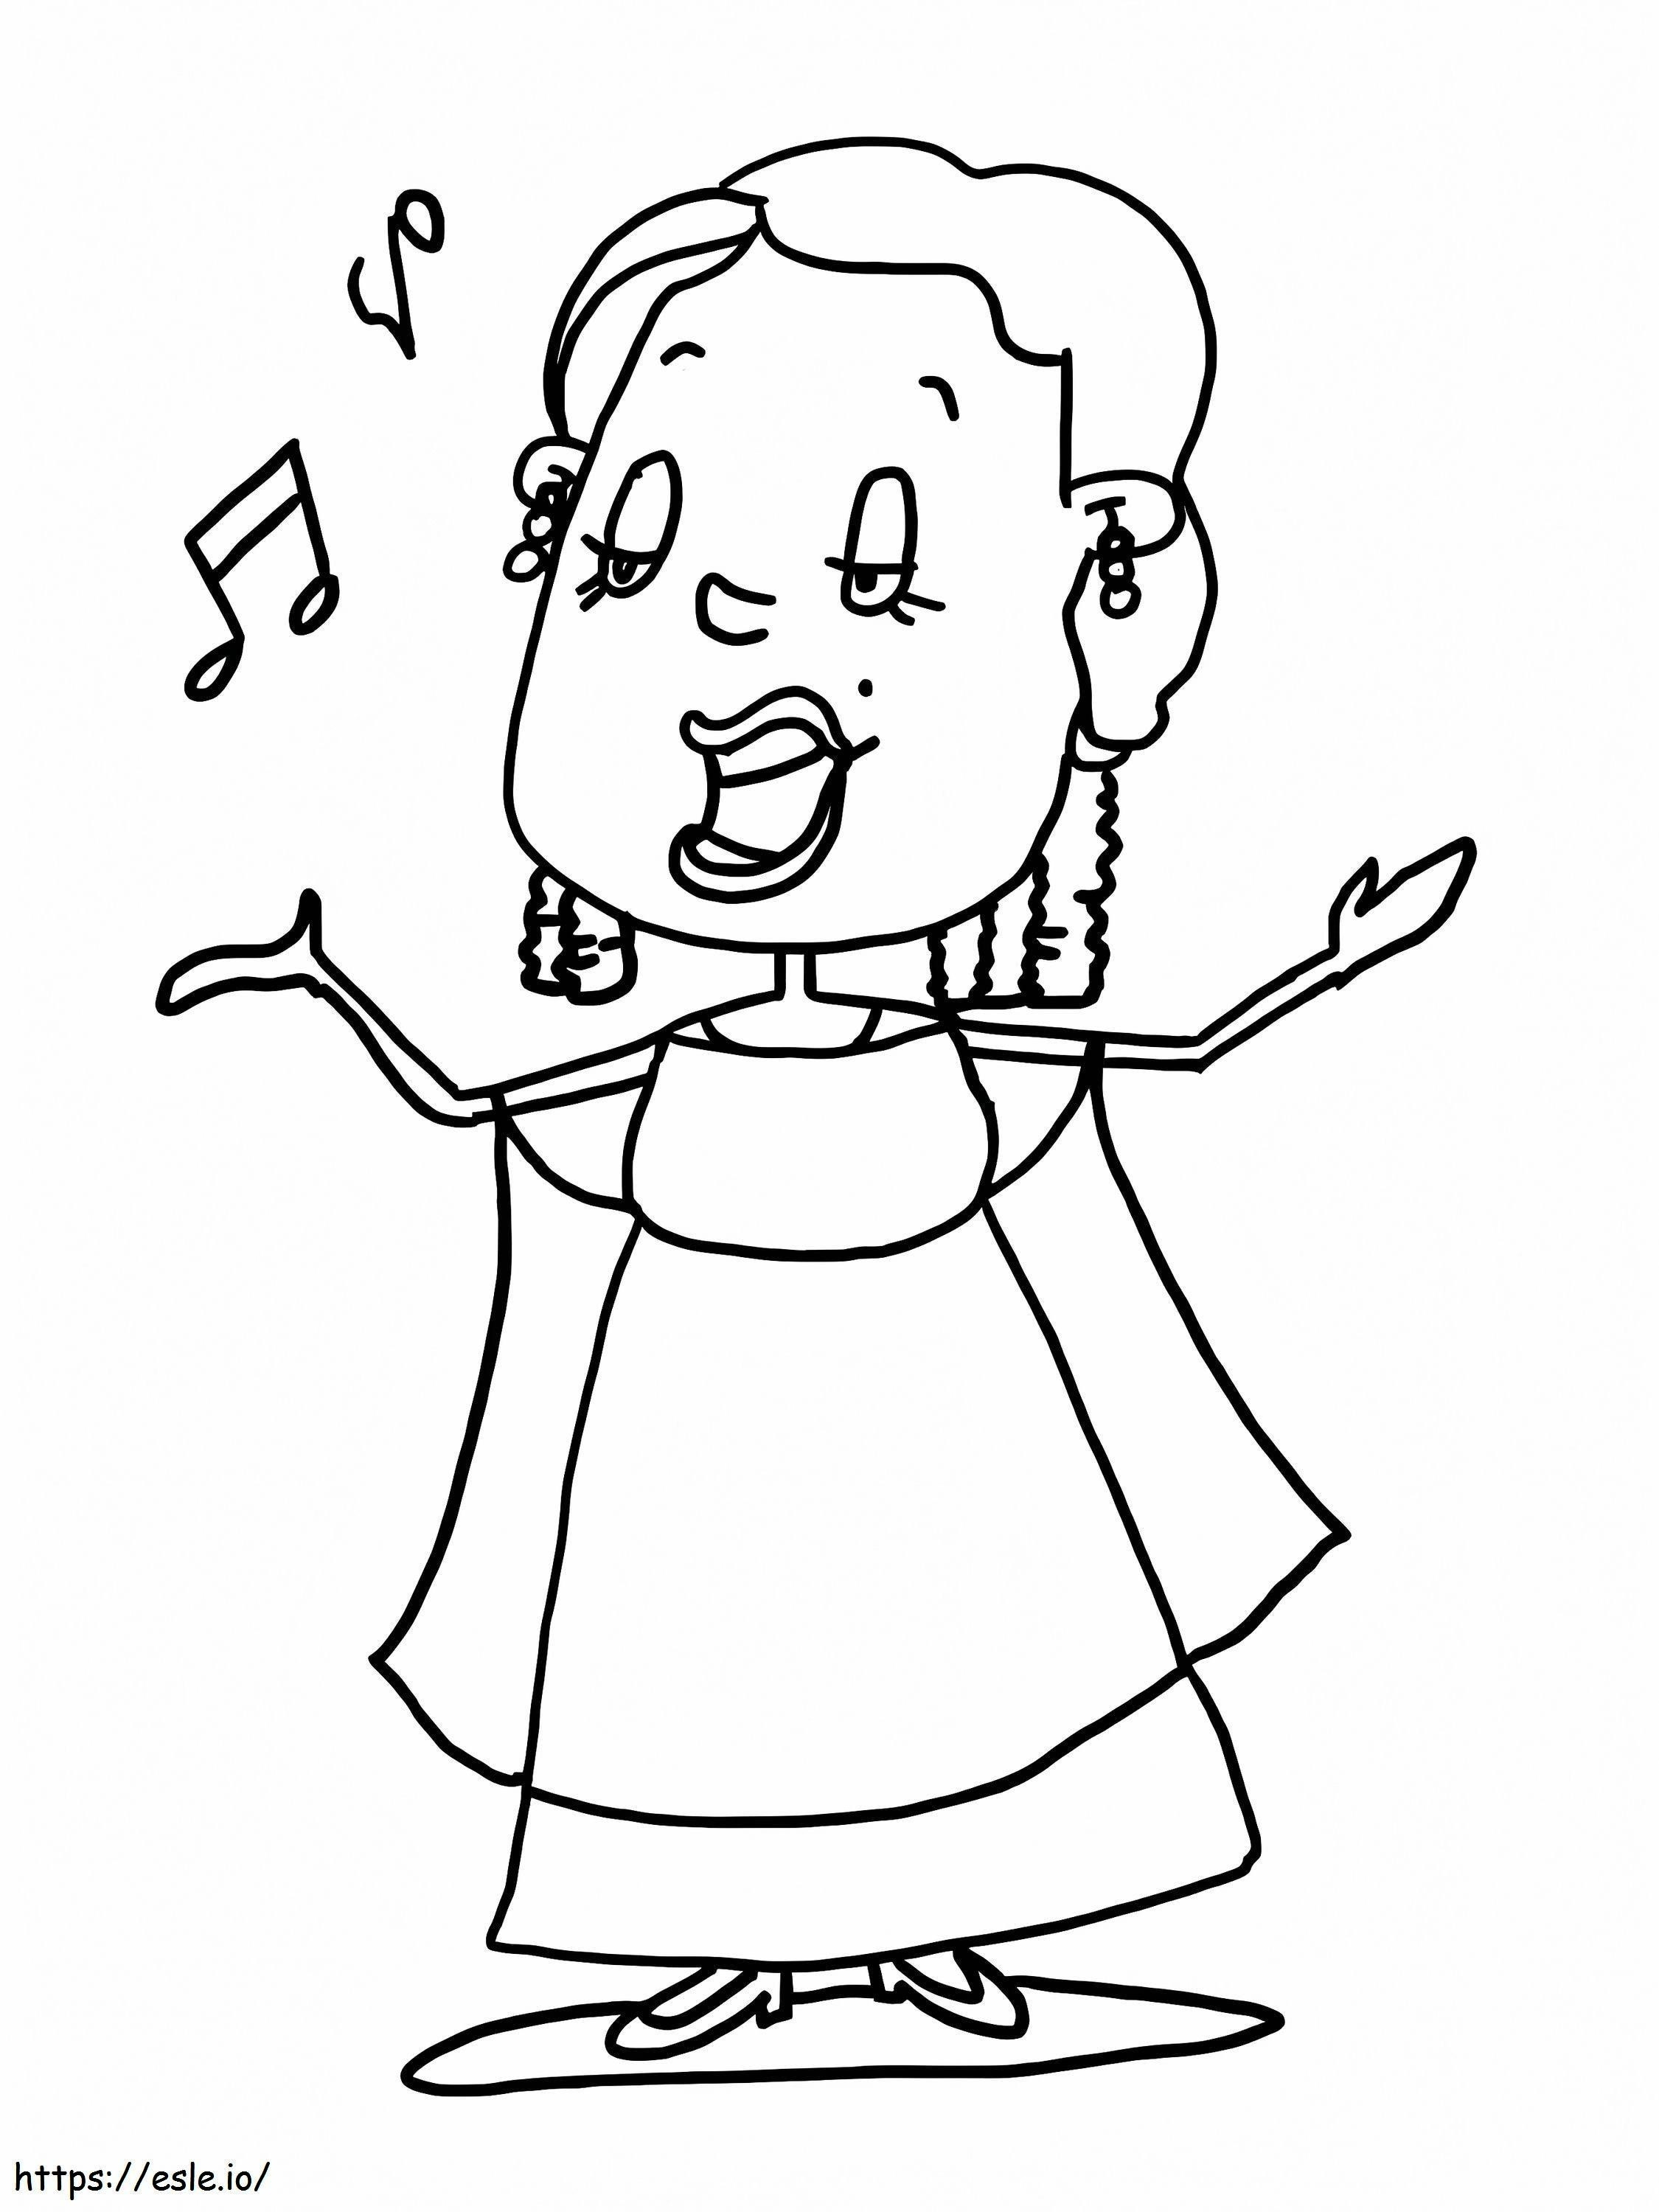 Opera Singer 2 coloring page